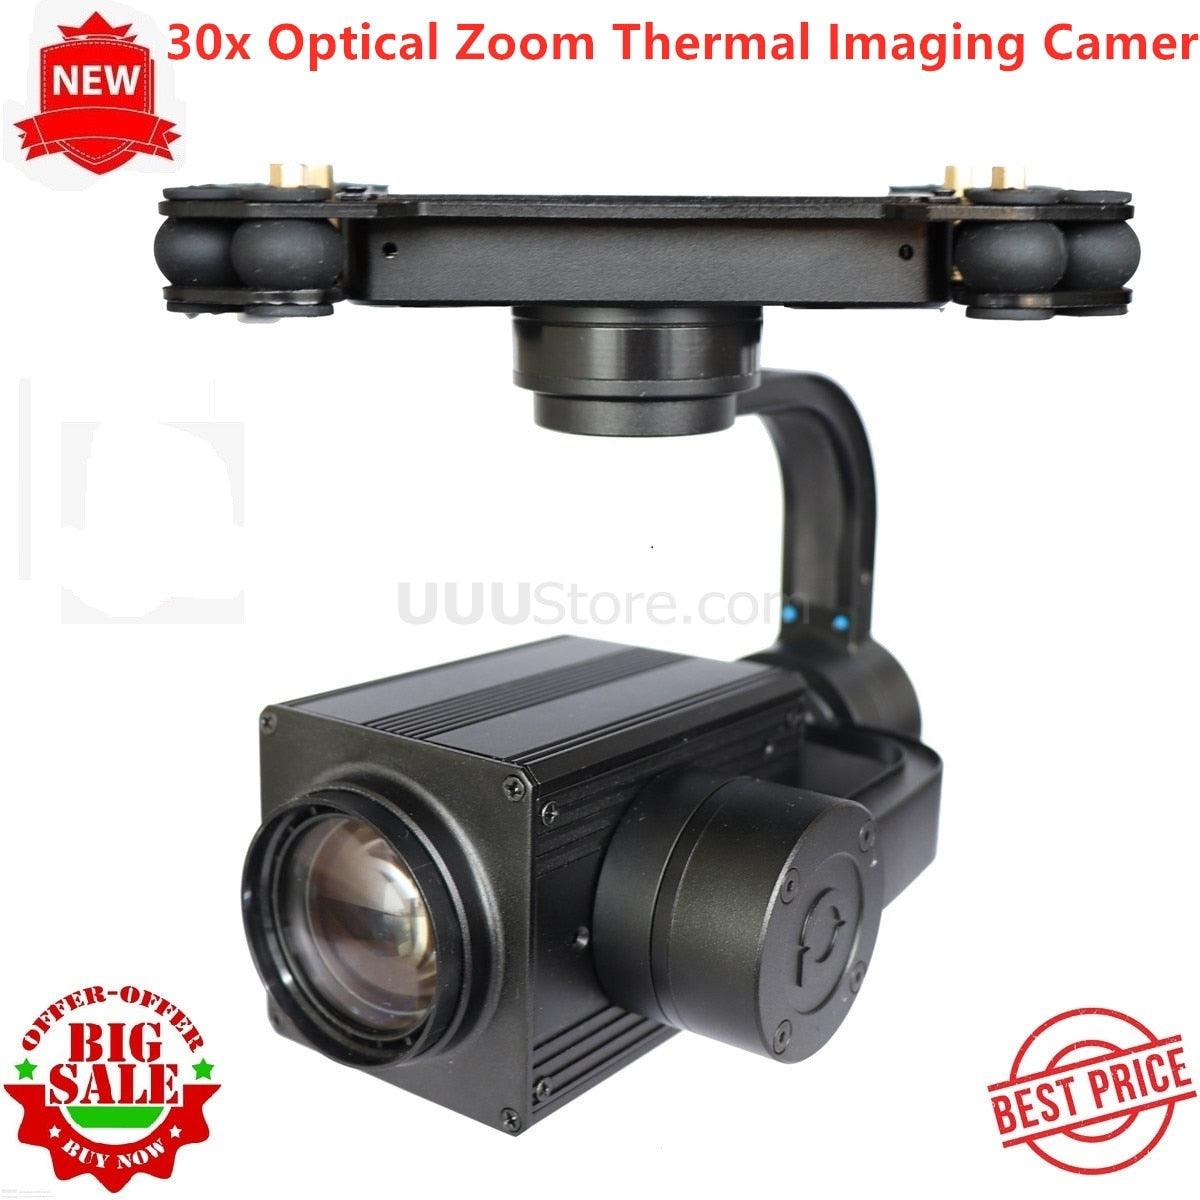 5-30KM 30x Optical Zoom UAV Drone Infrared Camera 3-Axis Stabilizer And Automatic Tracking - RCDrone